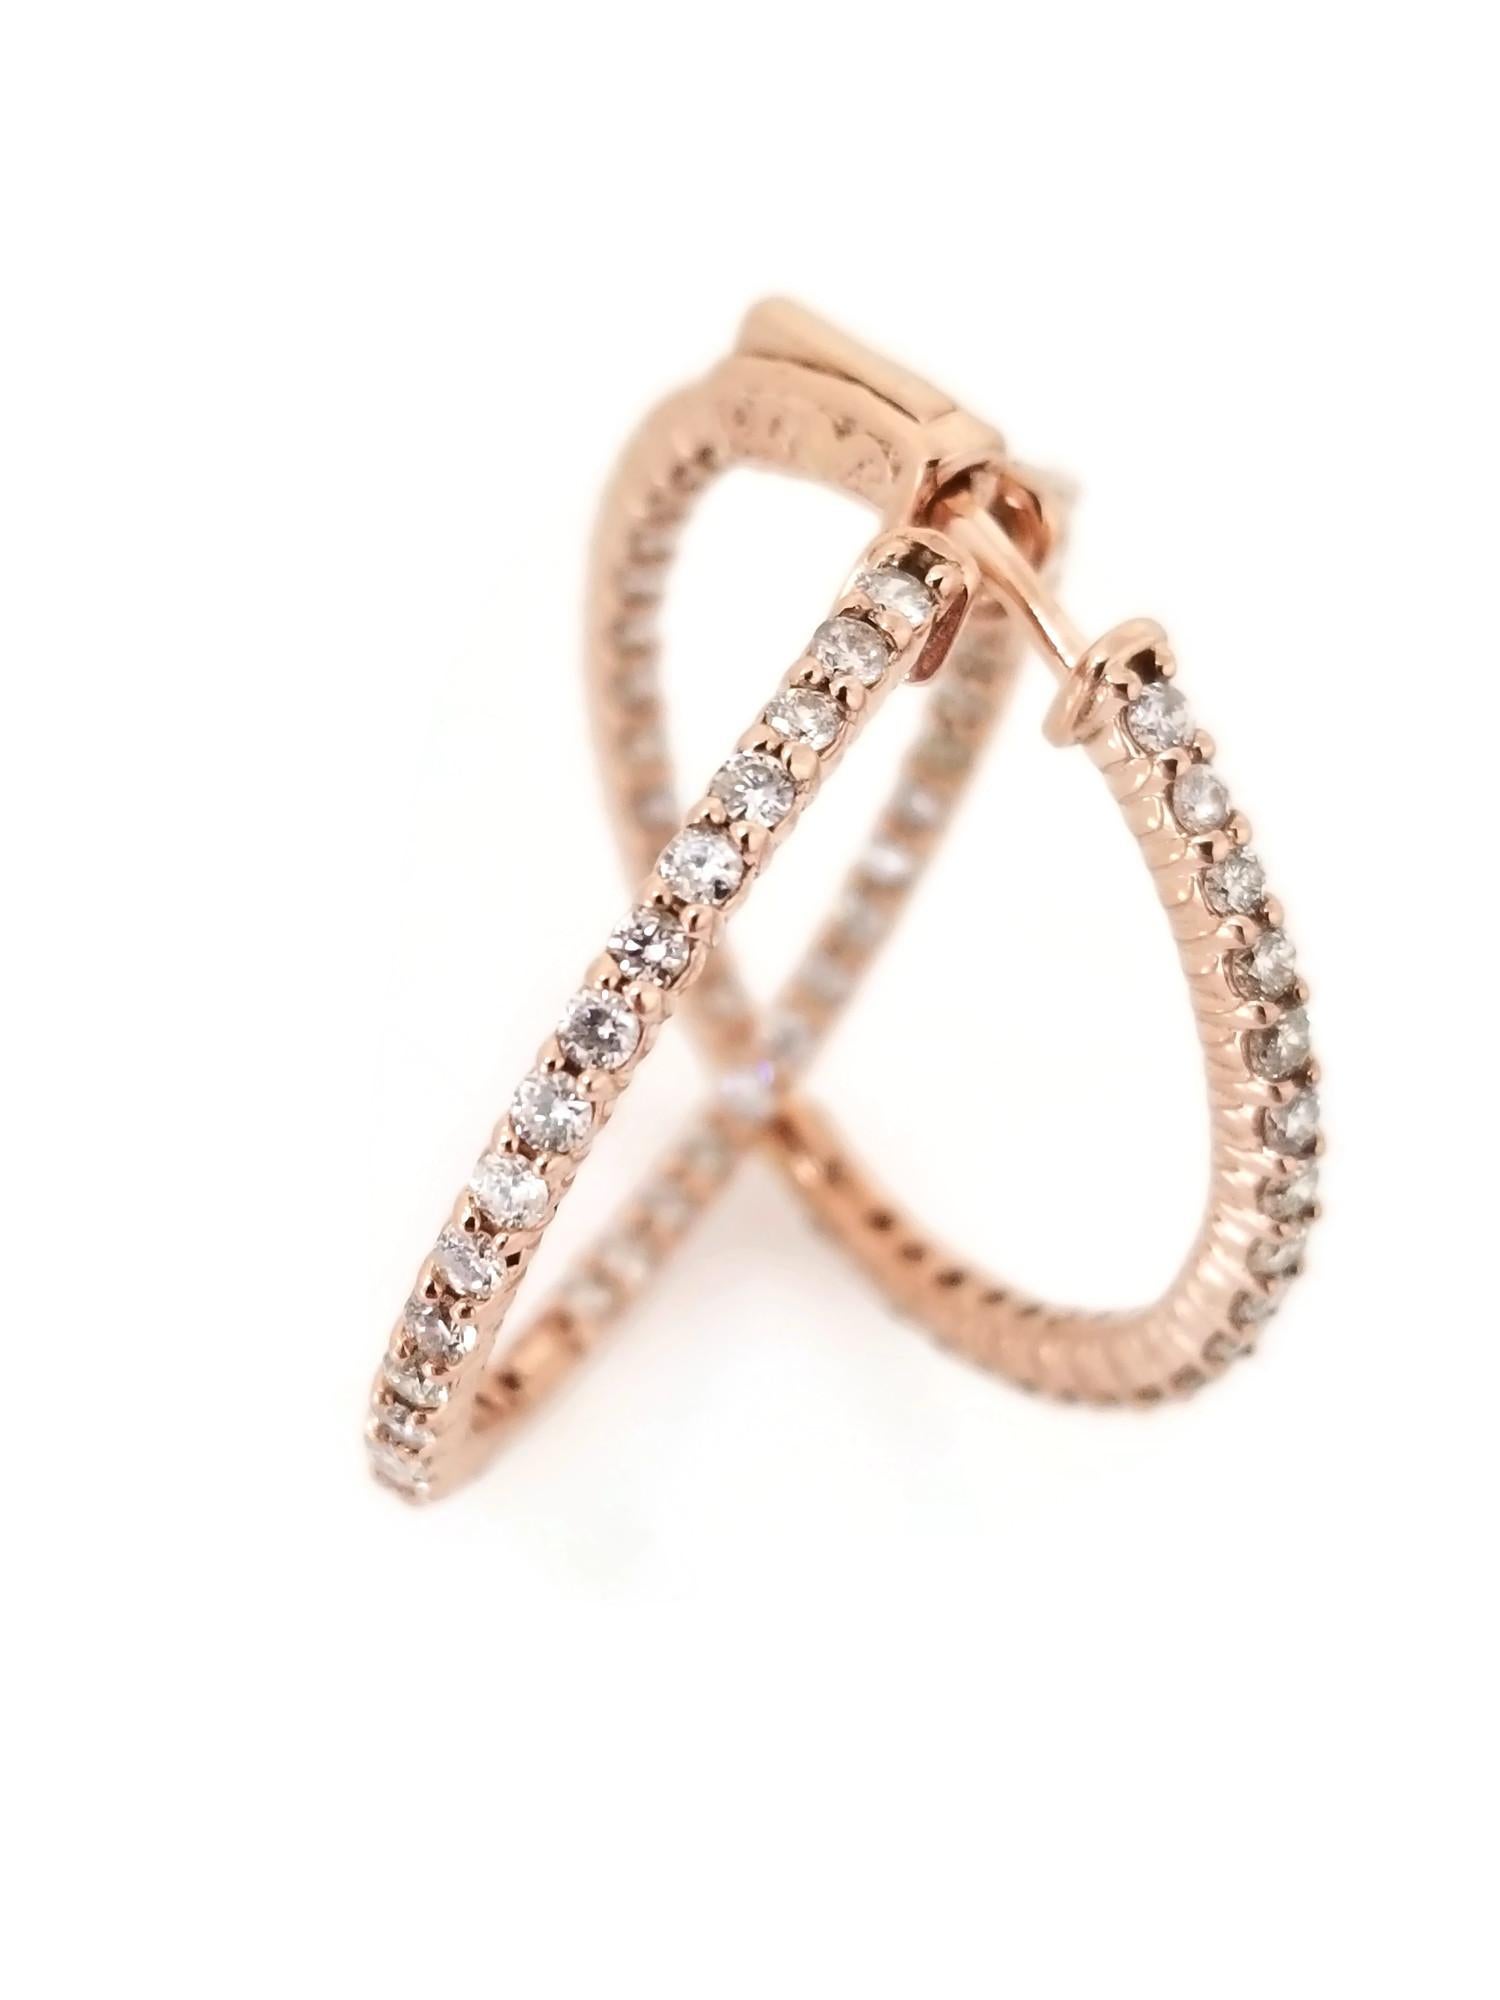 Beautiful pair of diamond inside out hoop earrings in 14K Rose gold. Secures with snap closure for wear. Average Color H, Clarity VS-SI, Measures 1.25 inch in diameter. 